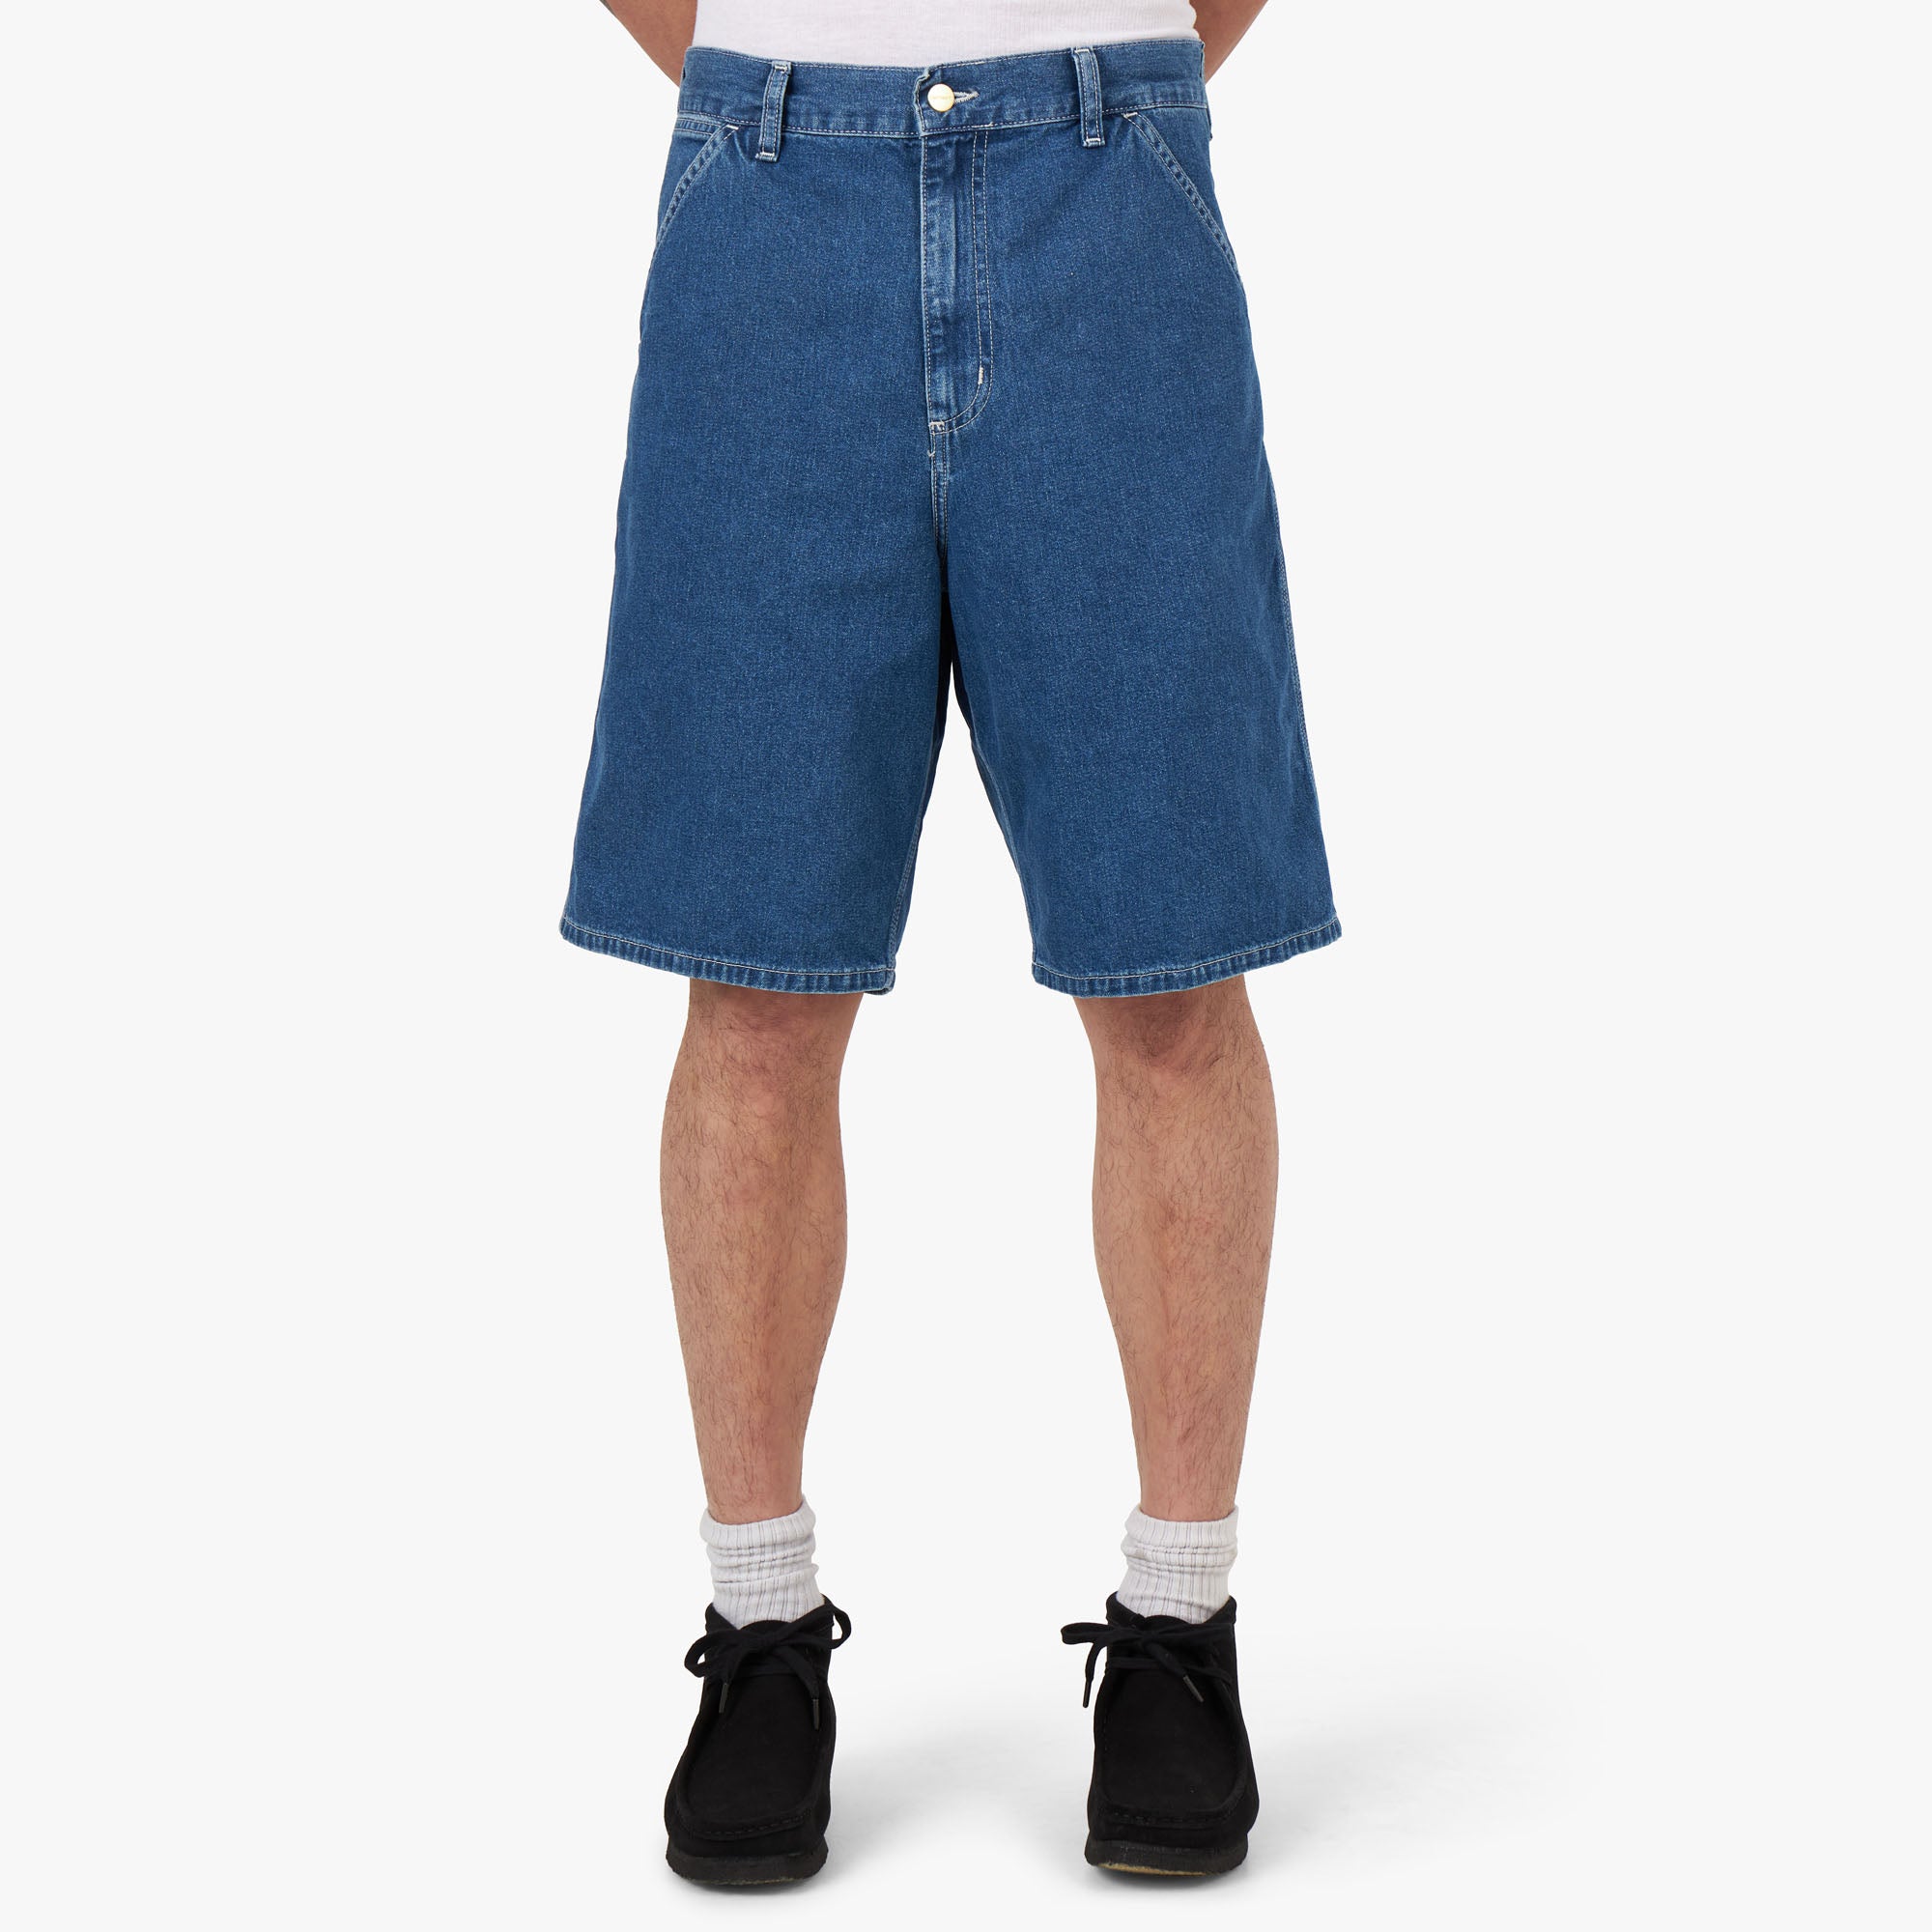 Carhartt WIP Simple Shorts / Blue Stone Washed 1